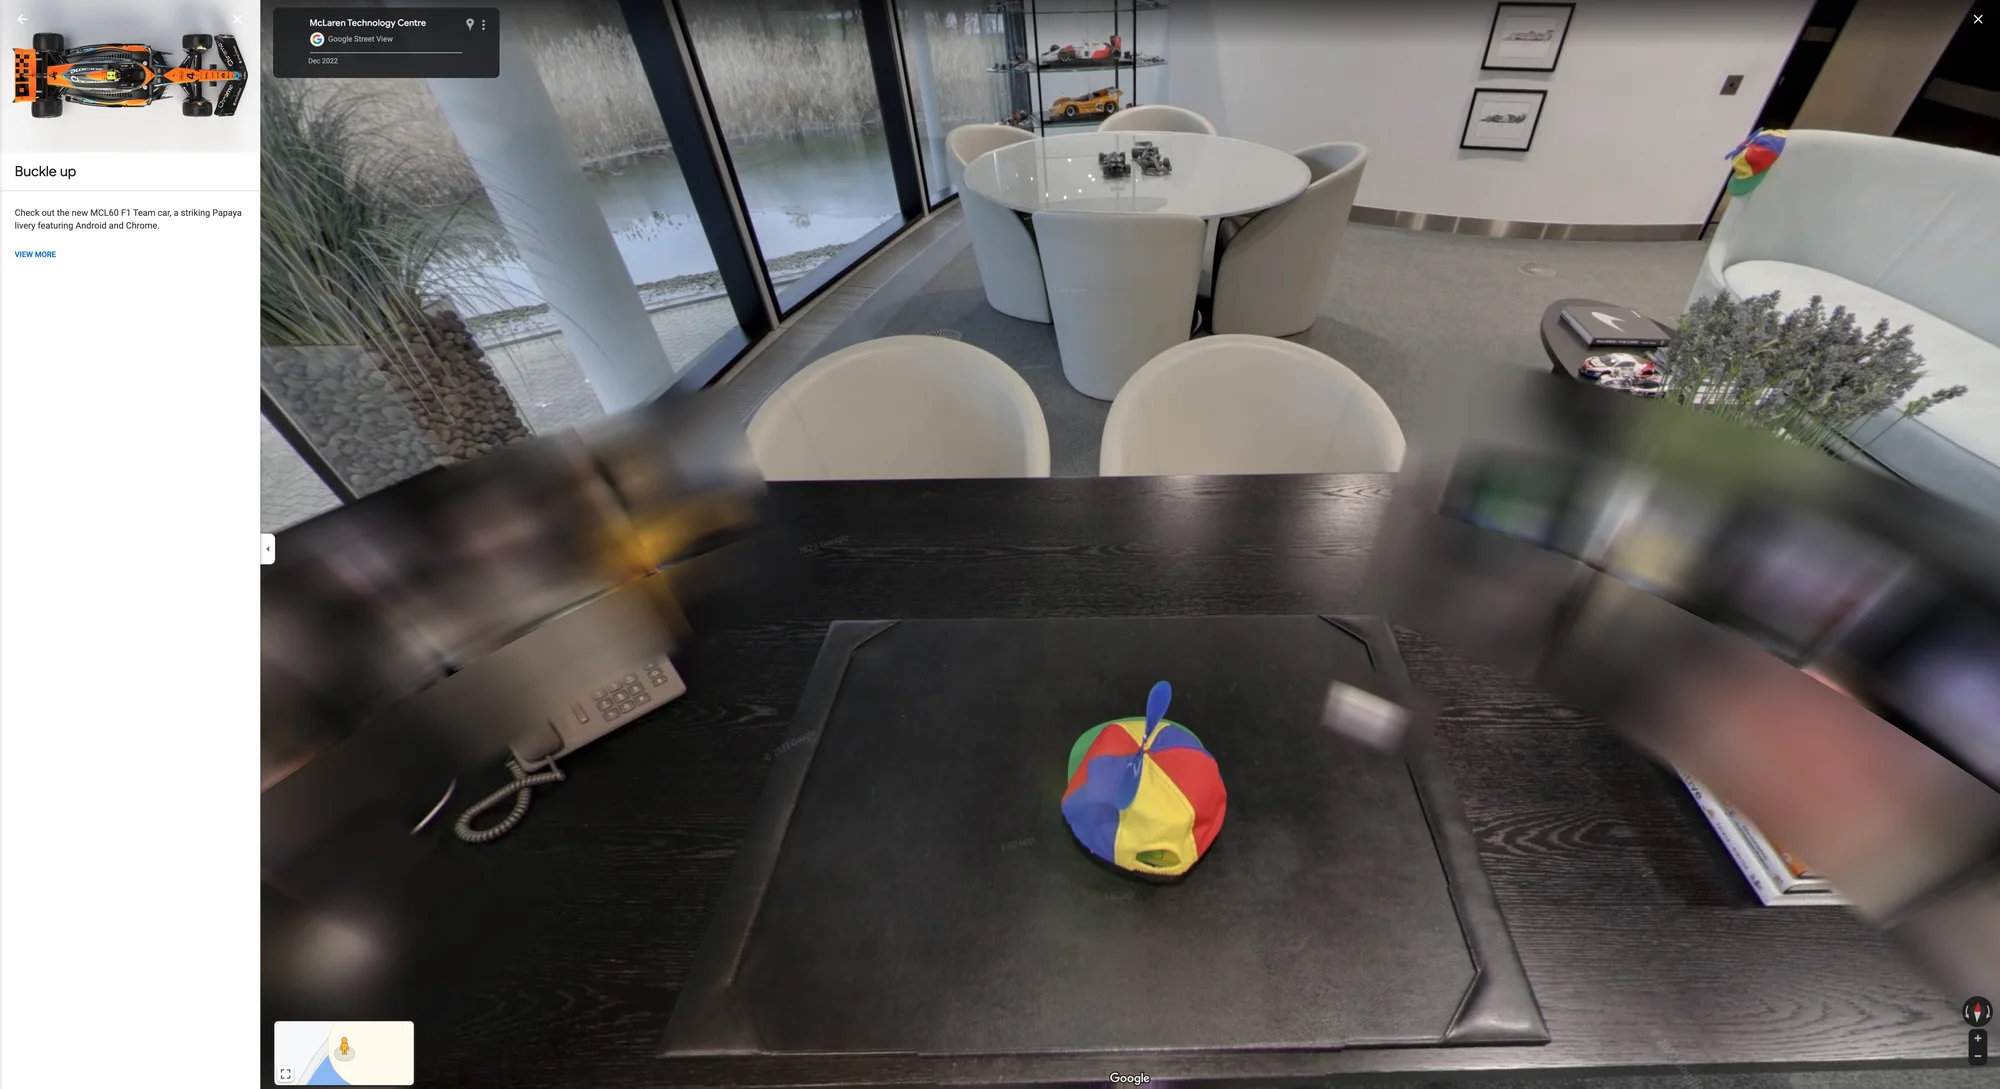 Street View imagery shows the inside of McLaren CEO Zak Brown's office featuring a Noogler hat on a desk.